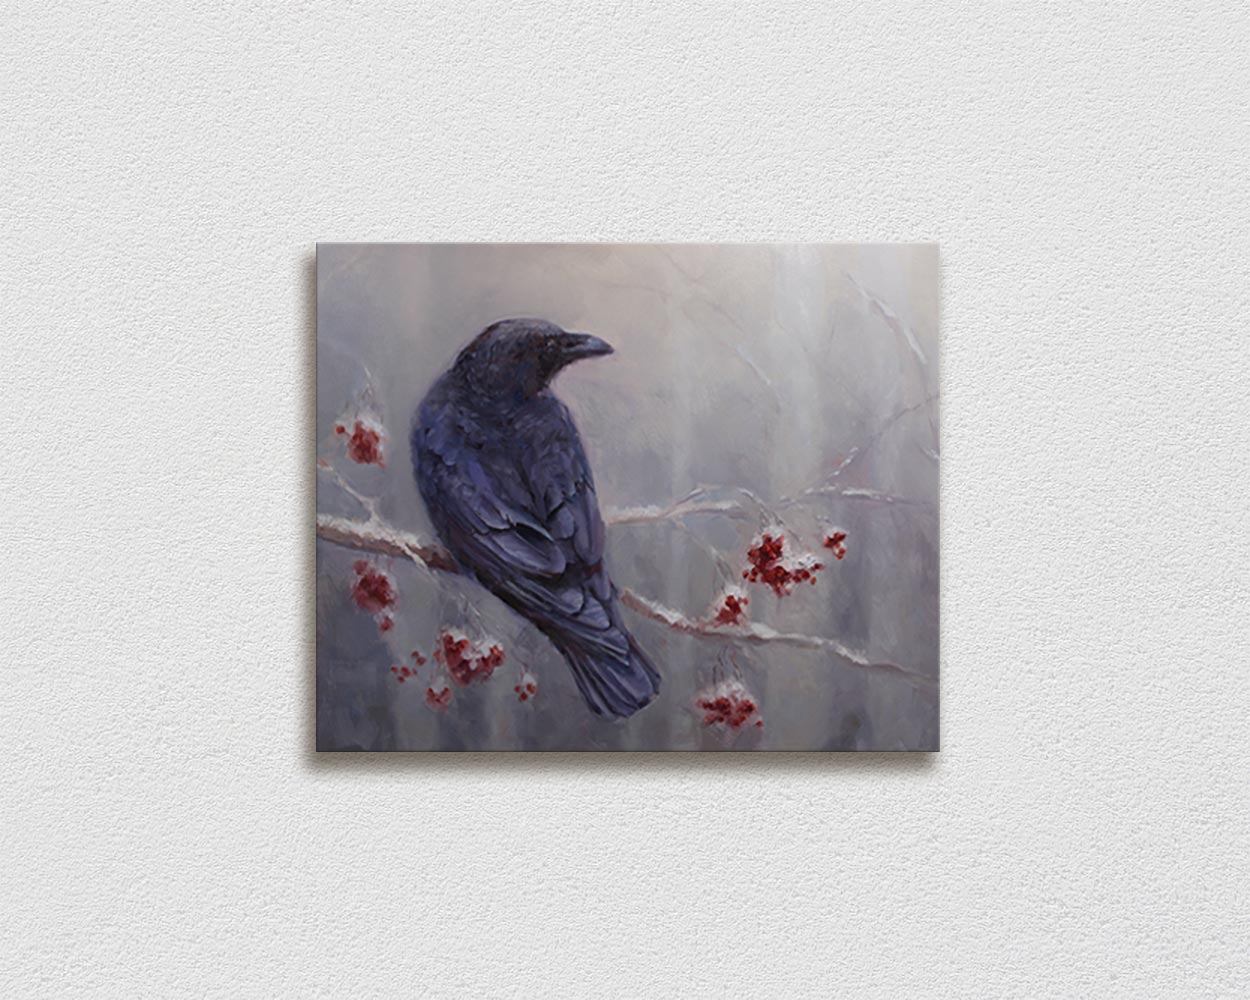 Raven wall art canvas of a bird in a winter forest.